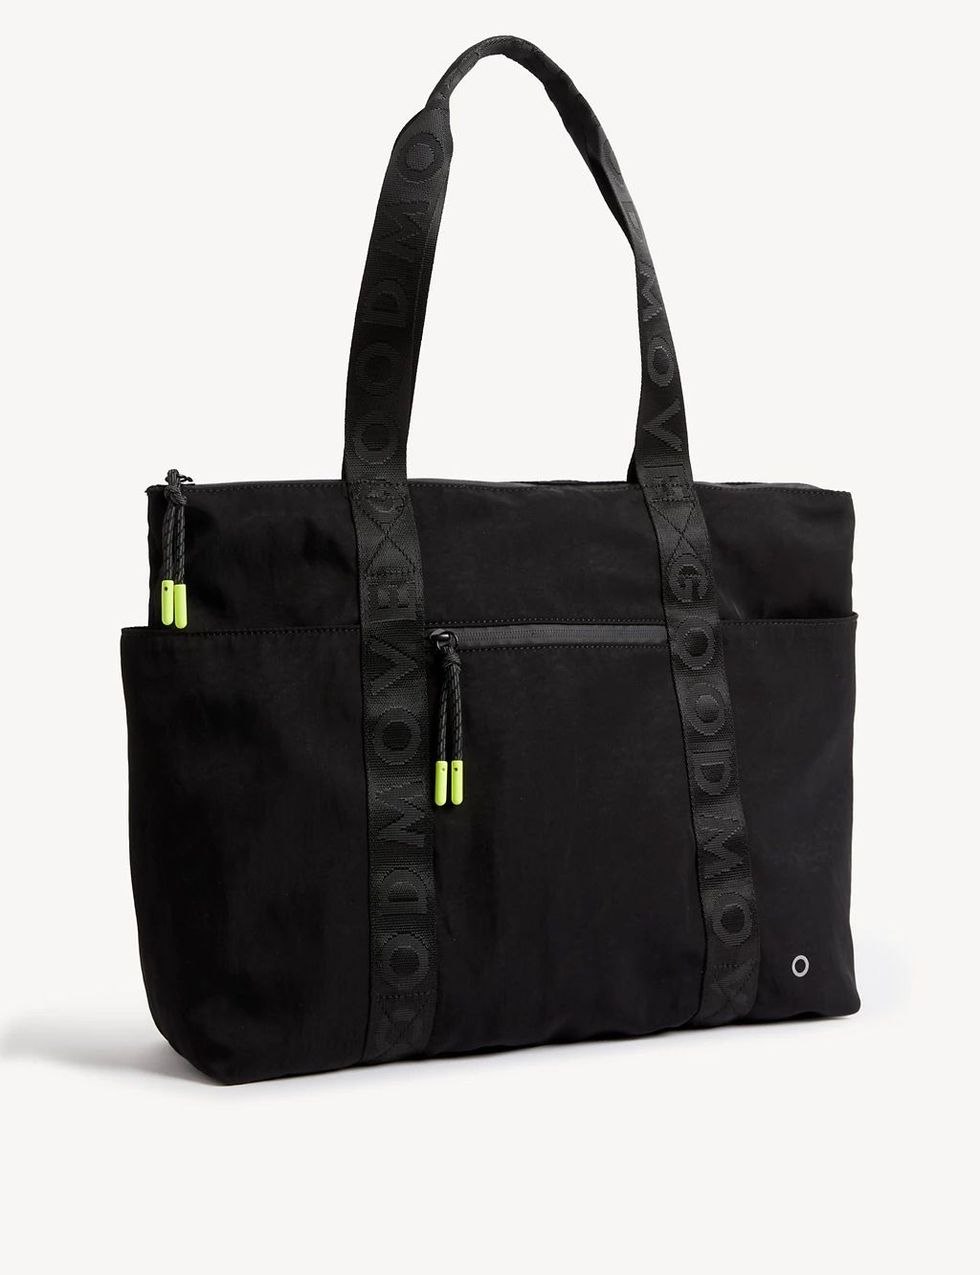 Gym bags for women: 17 best gym bags for every workout